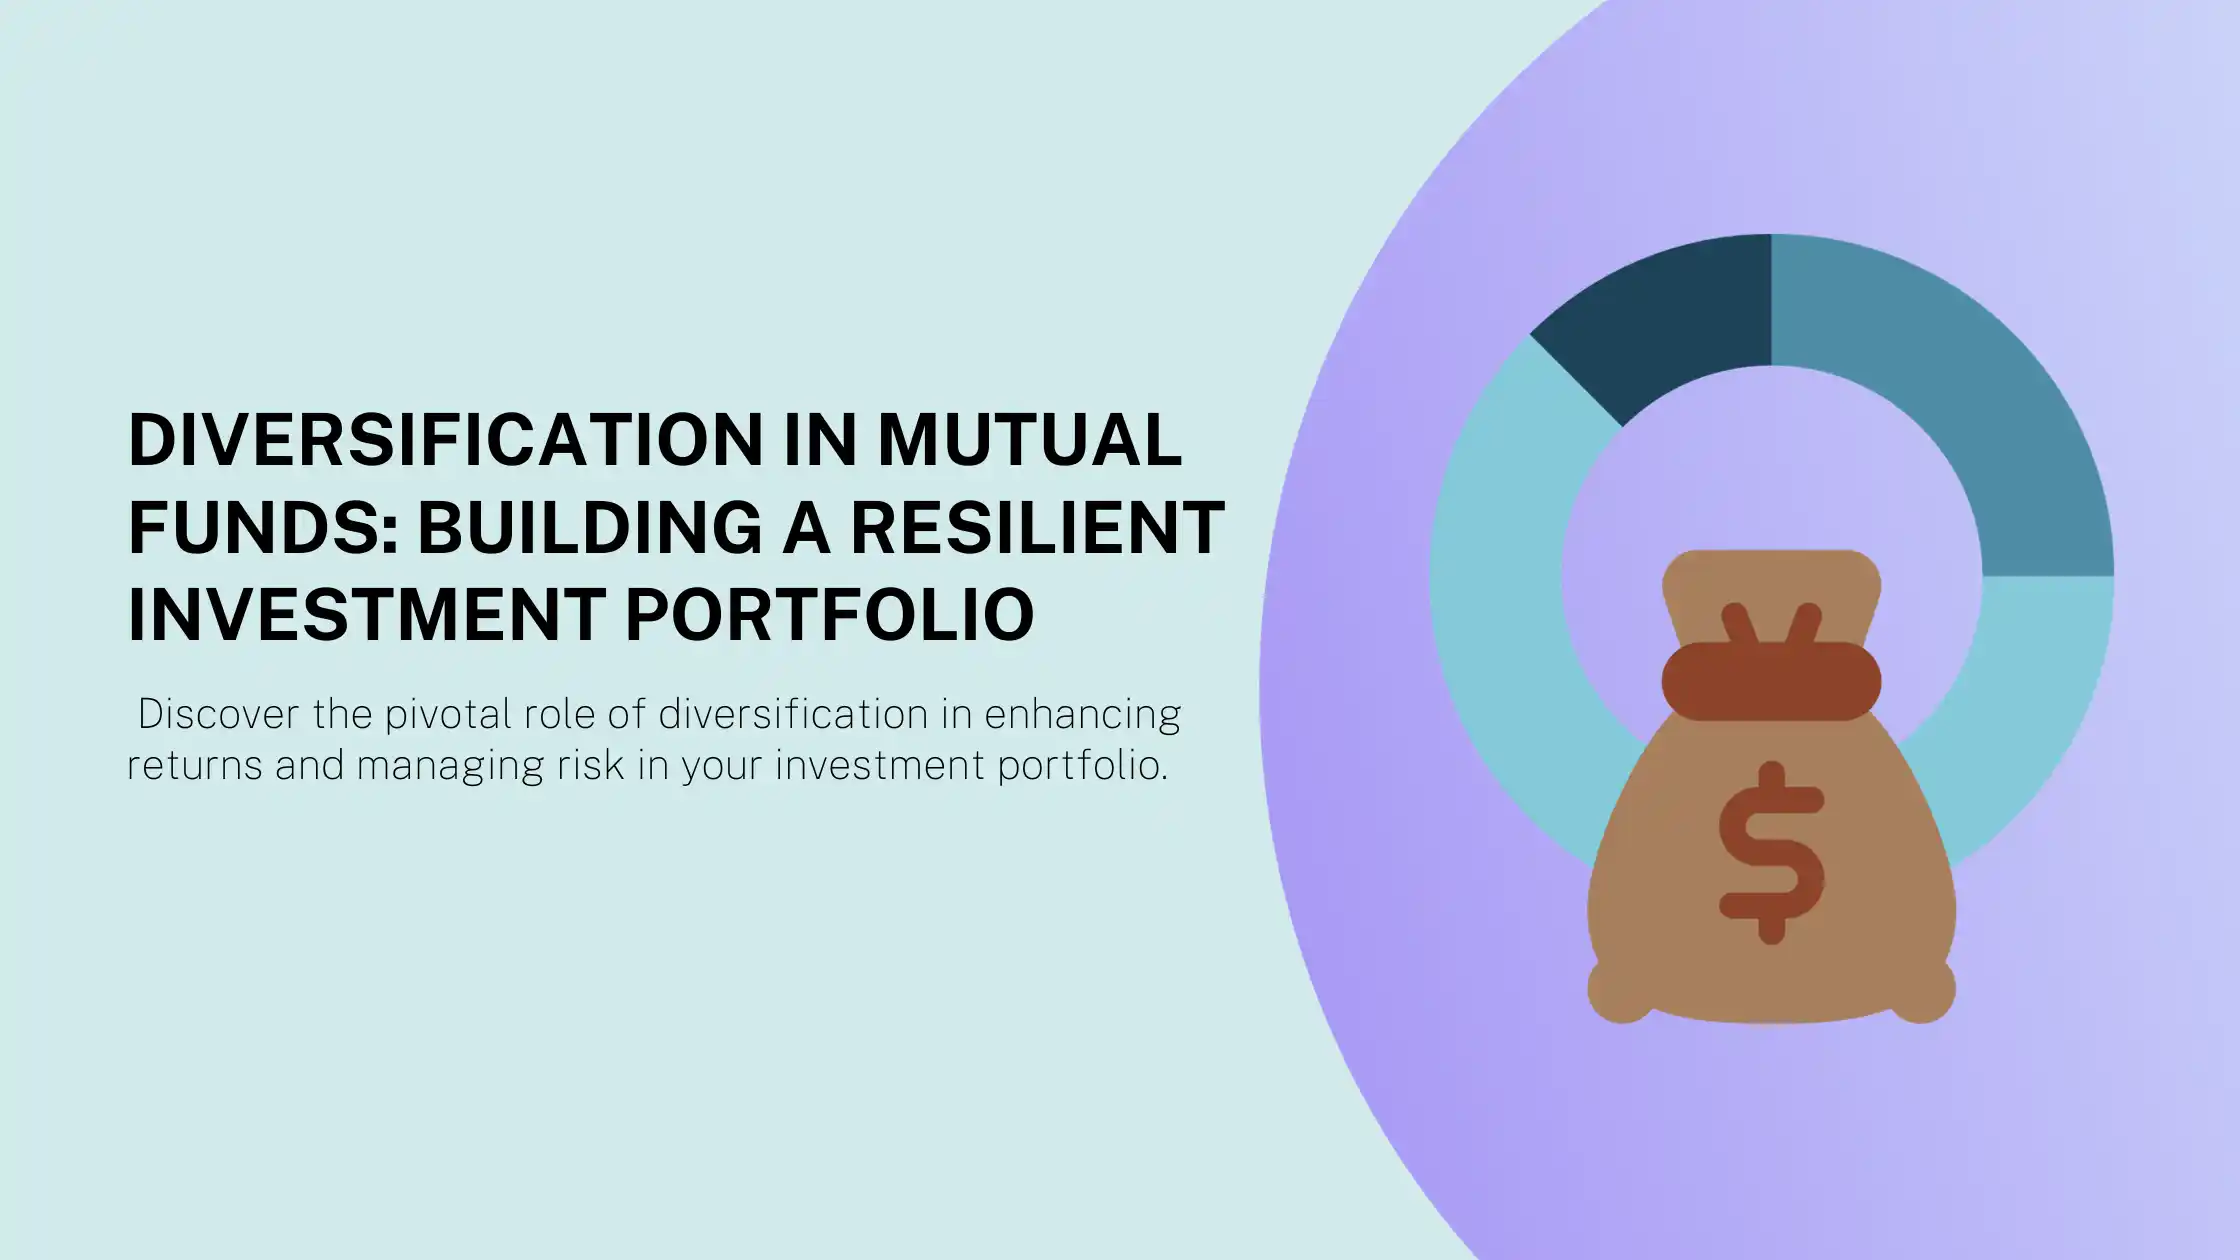 Diversification in Mutual Funds: Building a Resilient Investment Portfolio